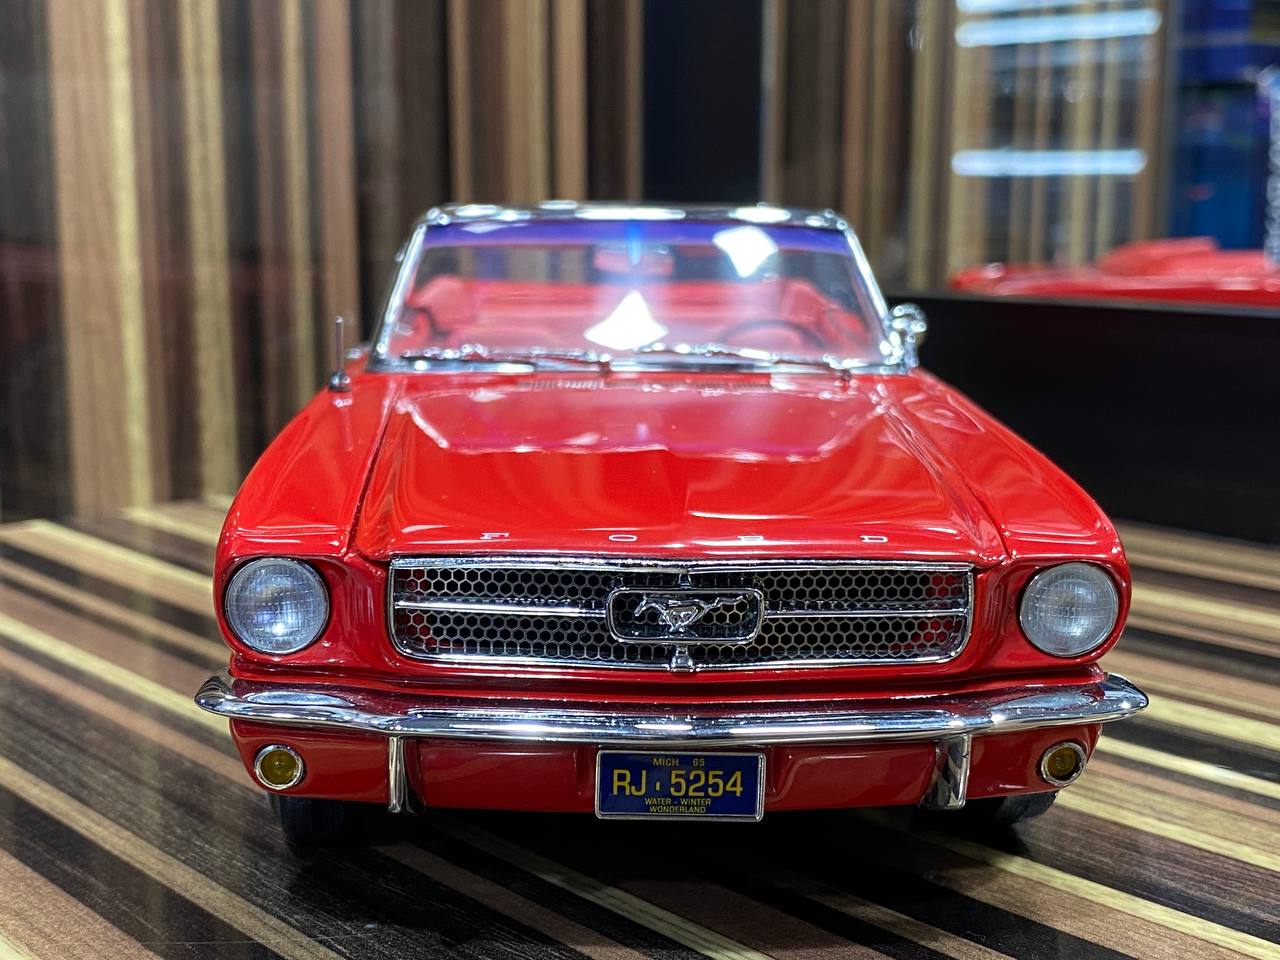 1/18 Diecast Ford Mustang Cabrio Red Model Car by Presicion Collection